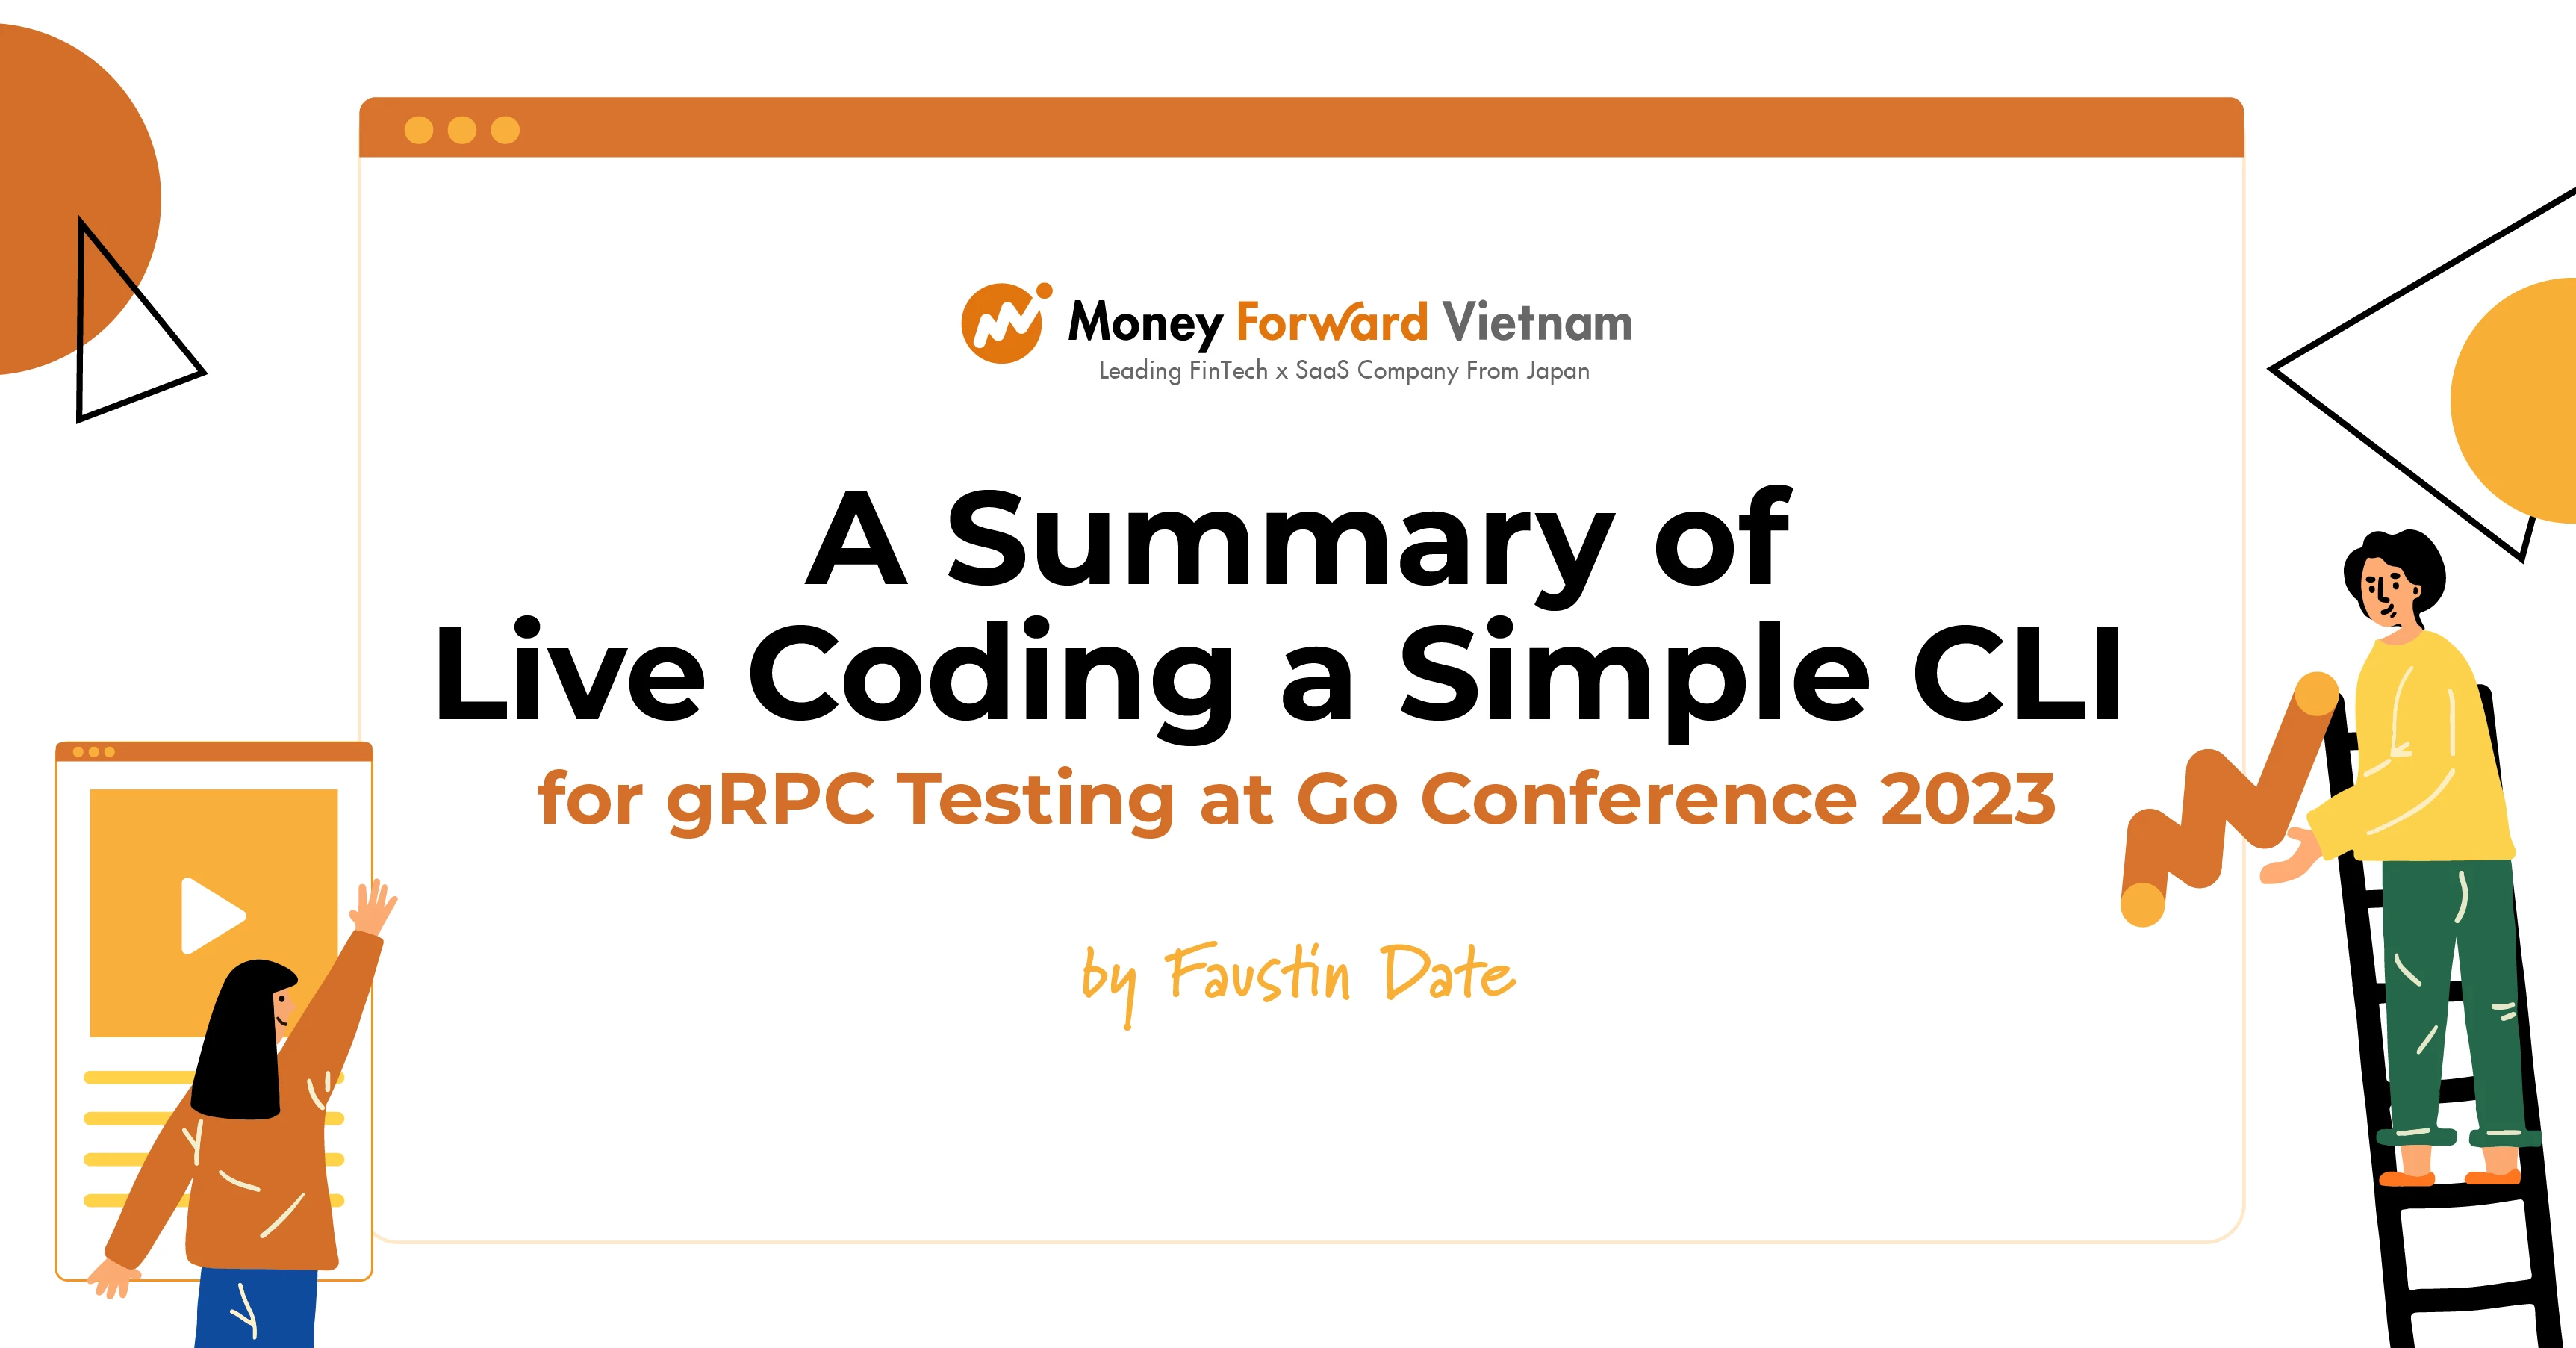 A Summary of Live Coding a Simple CLI for gRPC Testing at Go Conference 2023